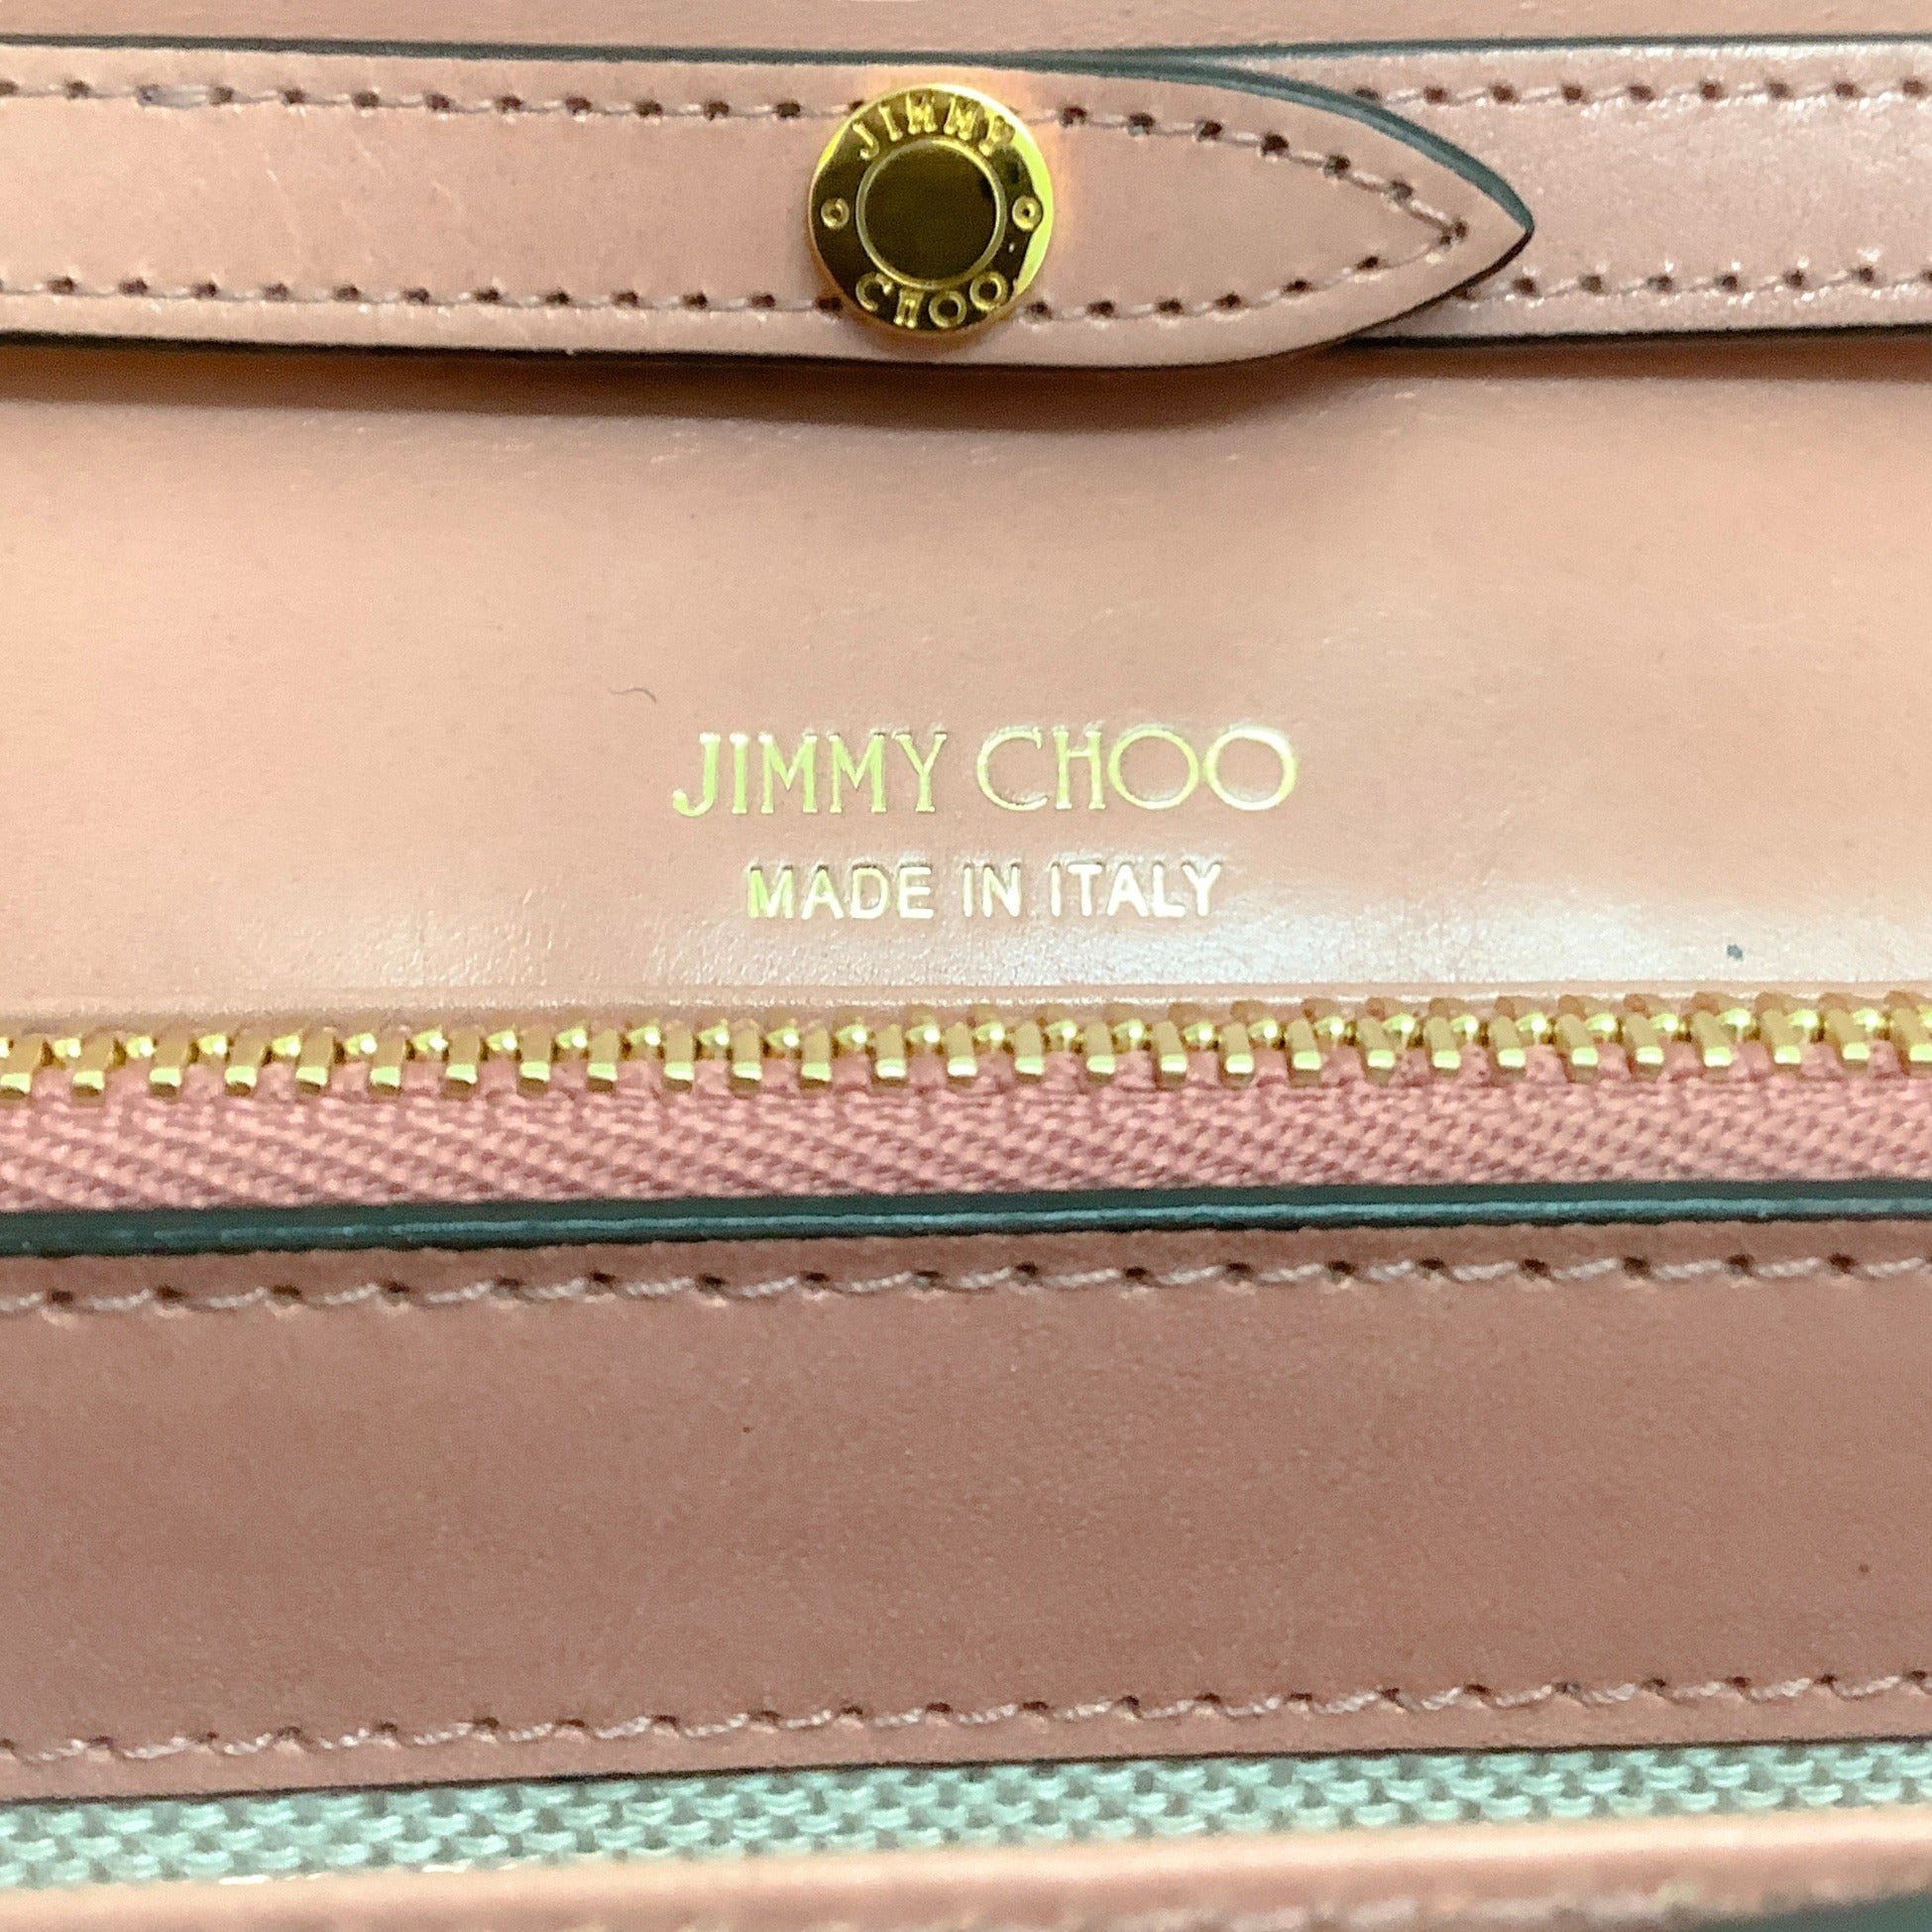 Jimmy Choo Pink Leather Wallet on Chain with Gold Chain Strap